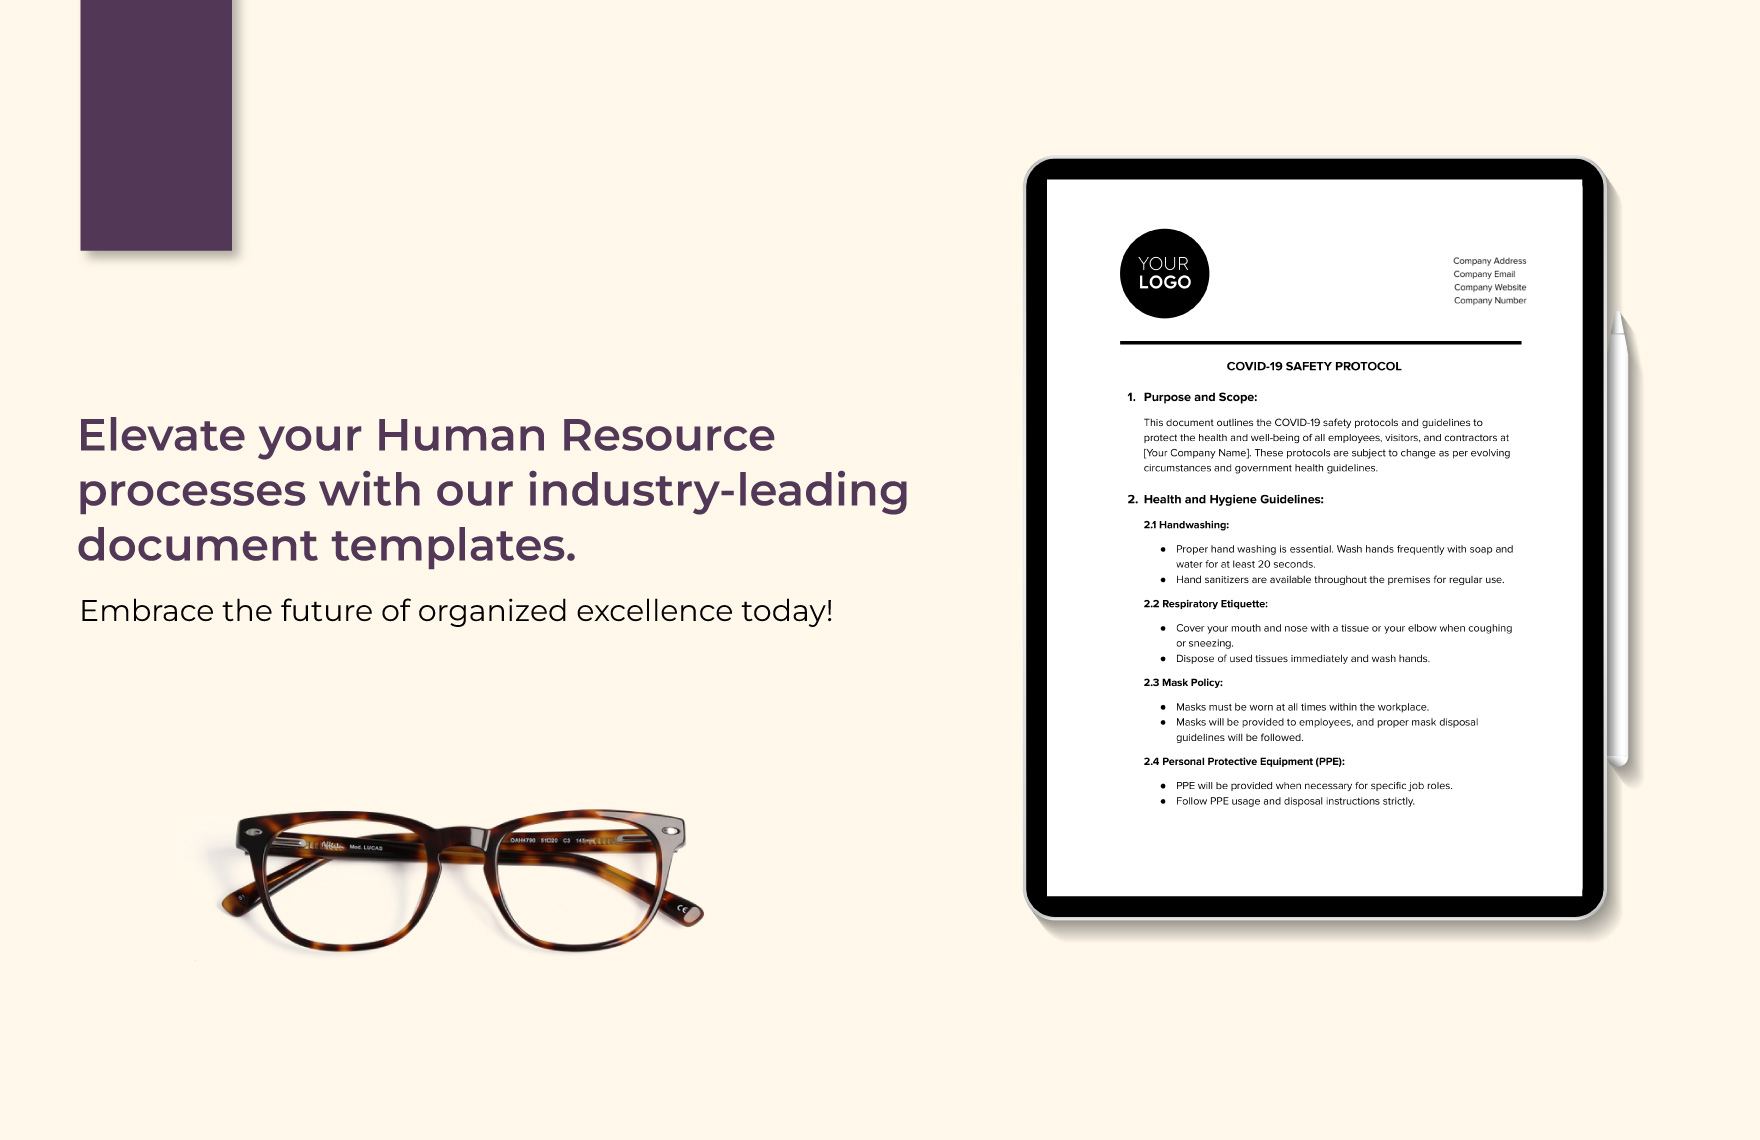 COVID-19 Safety Protocol HR Template